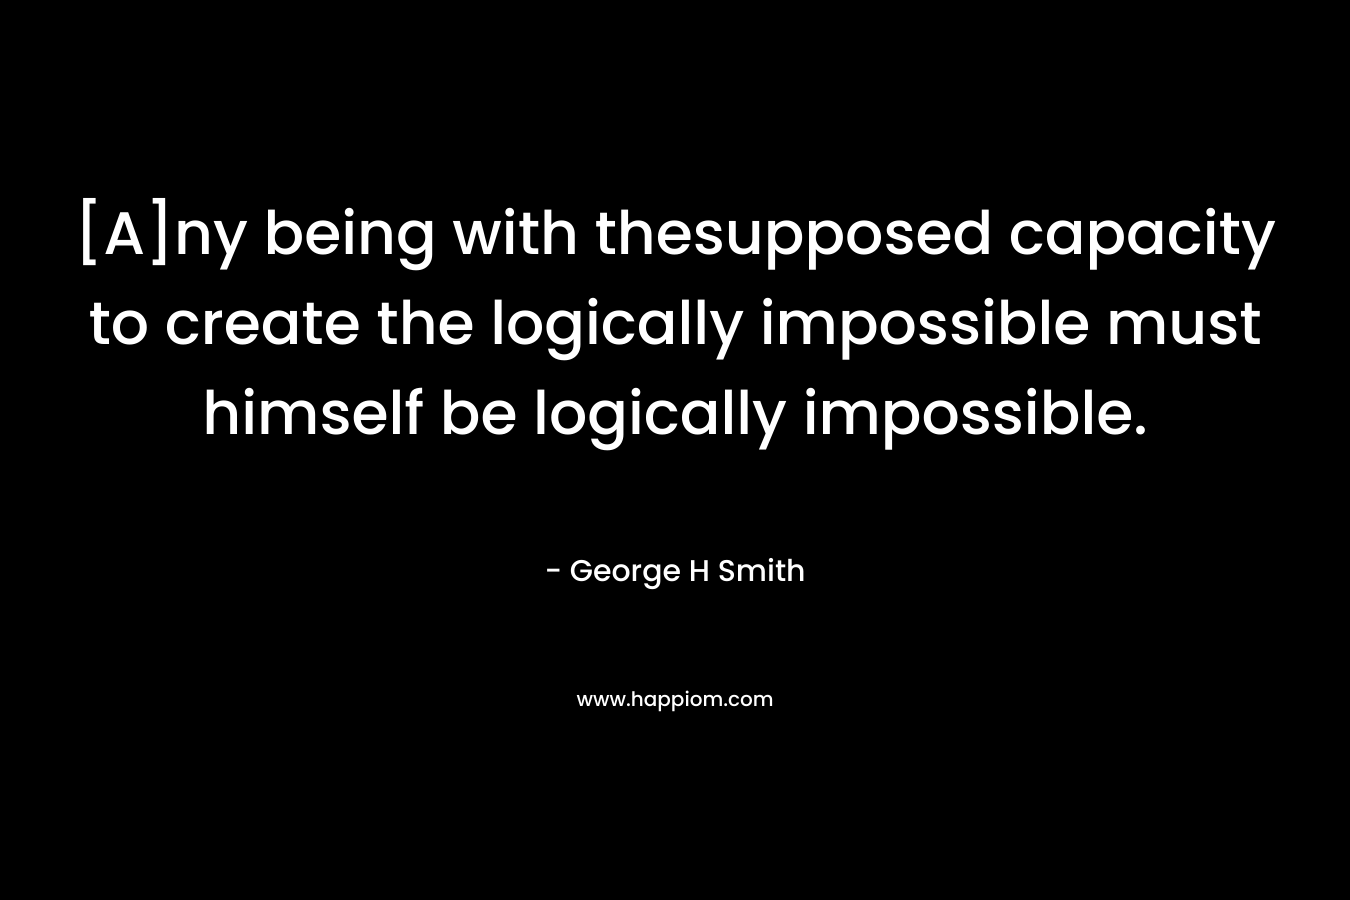 [A]ny being with thesupposed capacity to create the logically impossible must himself be logically impossible.